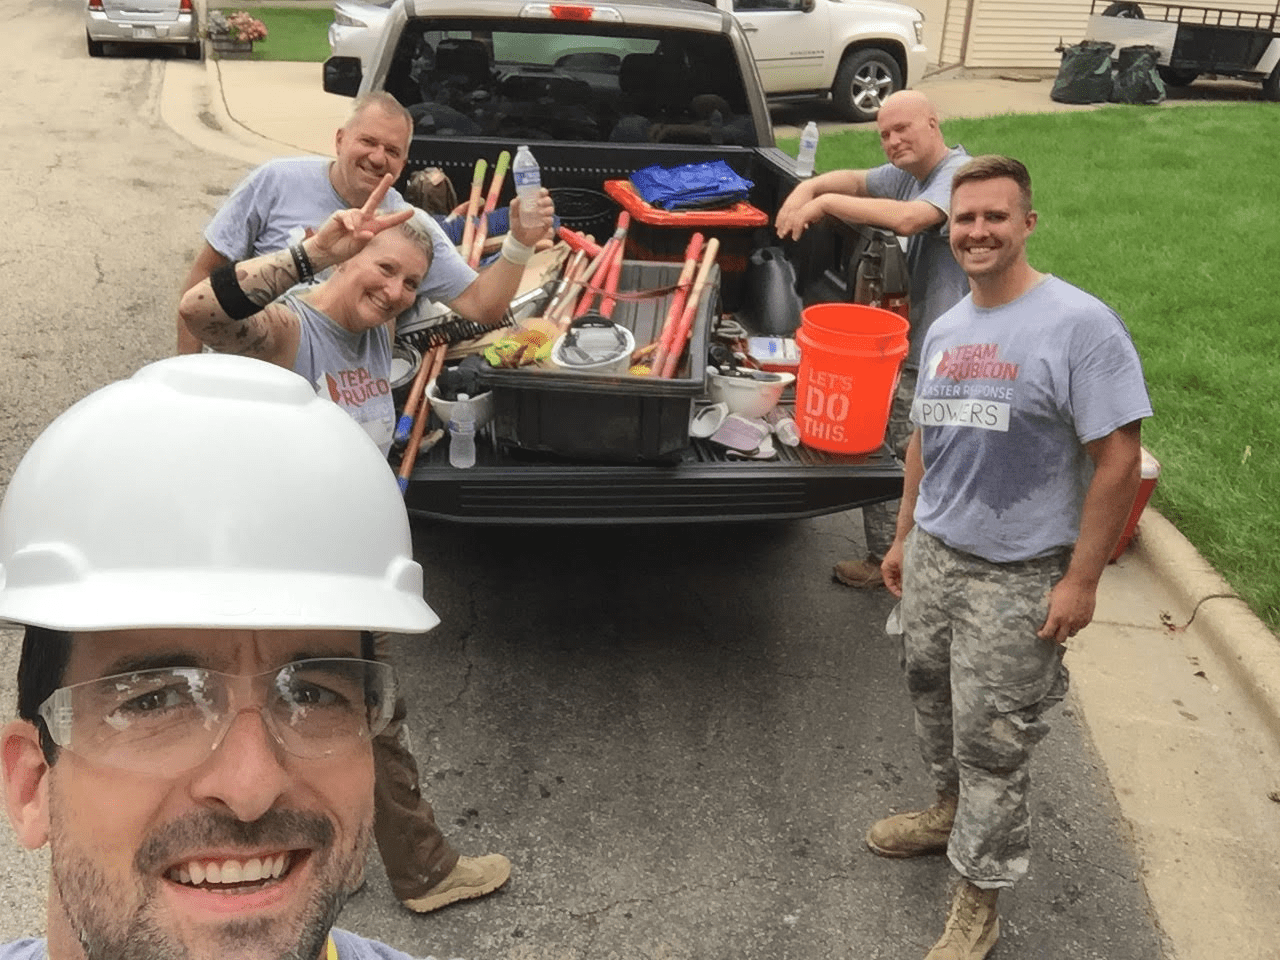 Making a Difference Team Rubicon